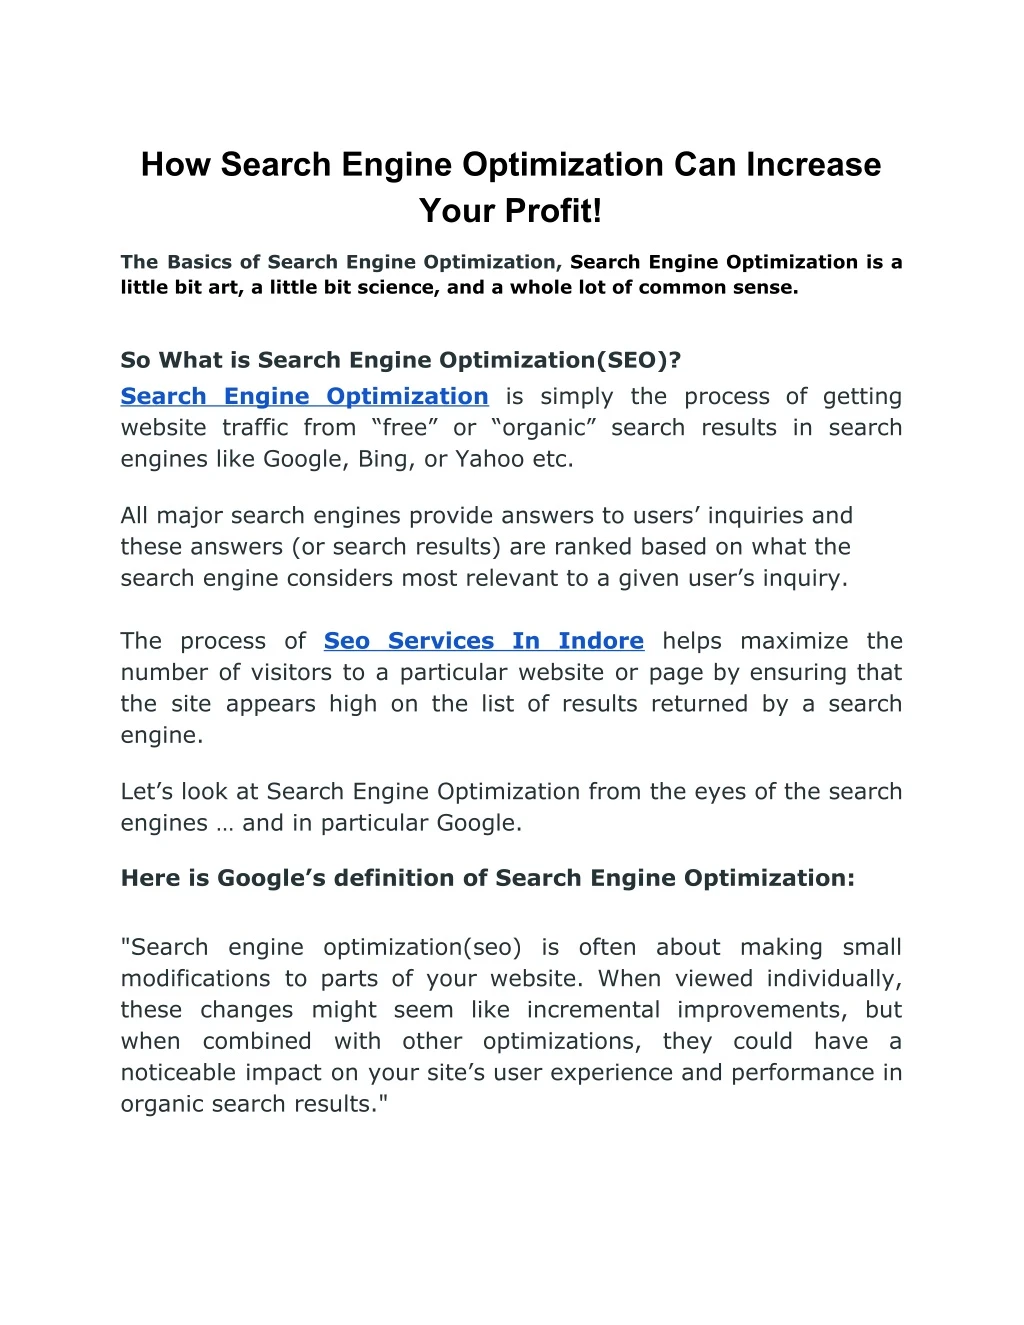 how search engine optimization can increase your